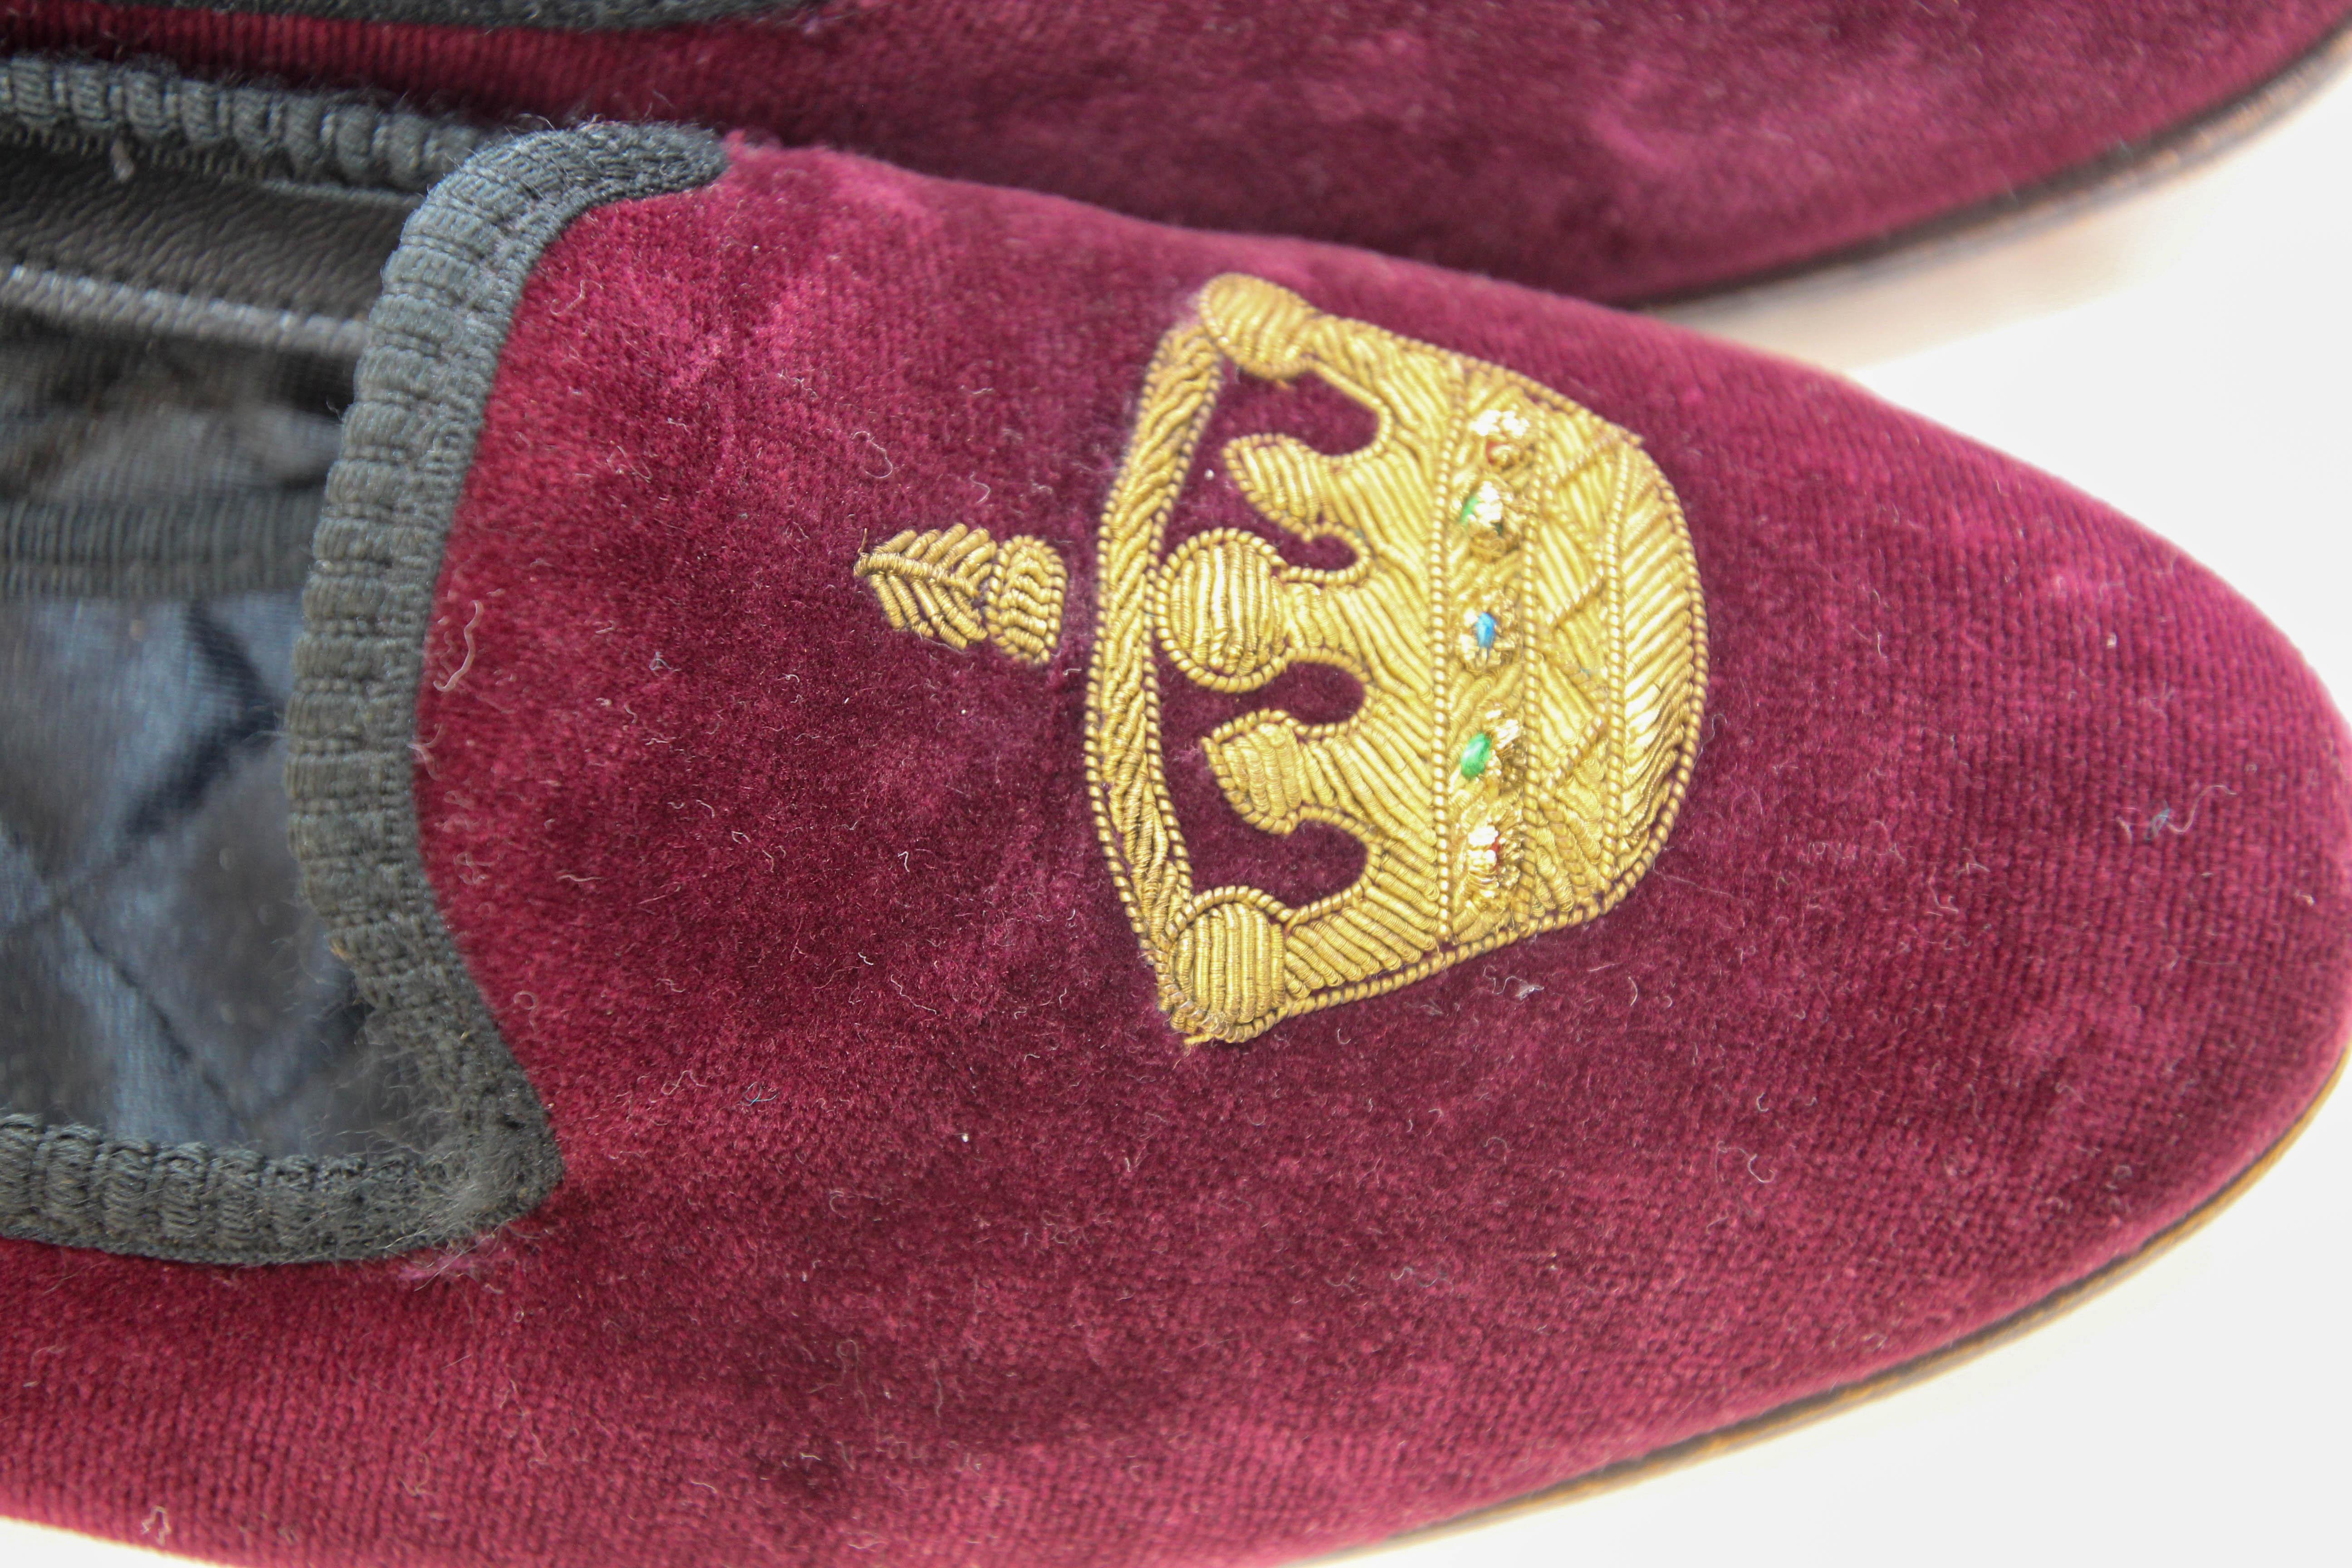 British Crown Embroidery Velvet Burgundy Loafers Slip On Size 6.5 For Sale 5